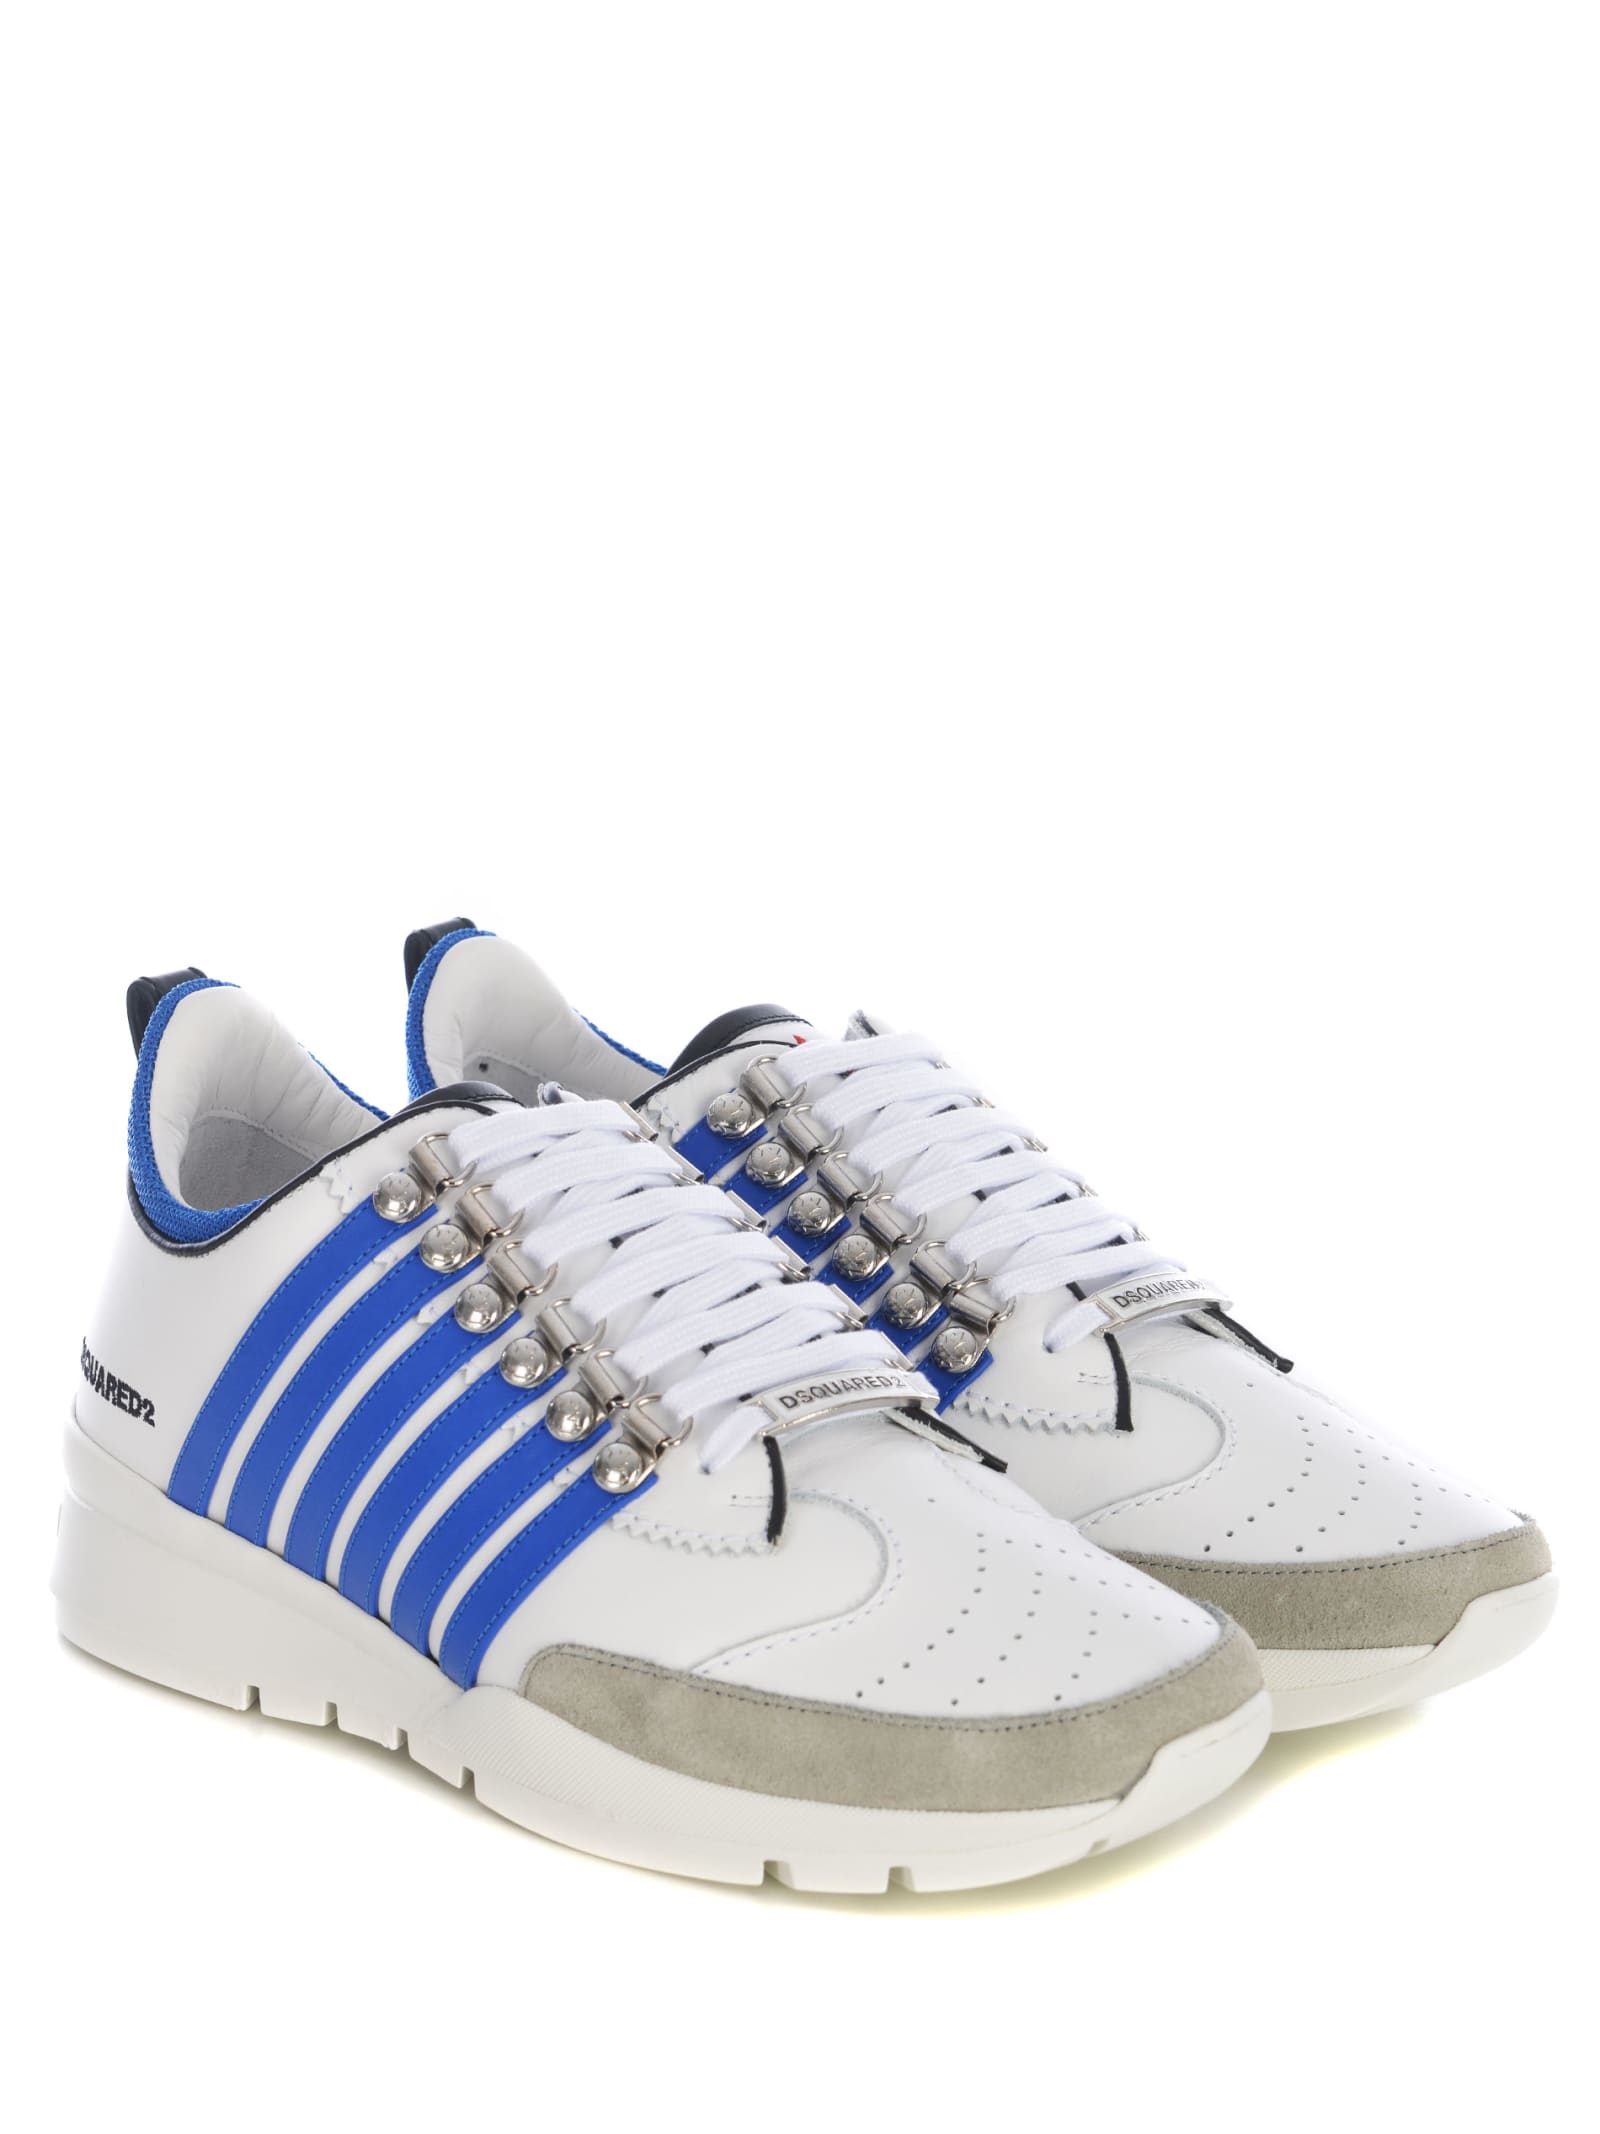 Shop Dsquared2 Sneakers  Legendary Made Of Cotton In Bianco/azzurro